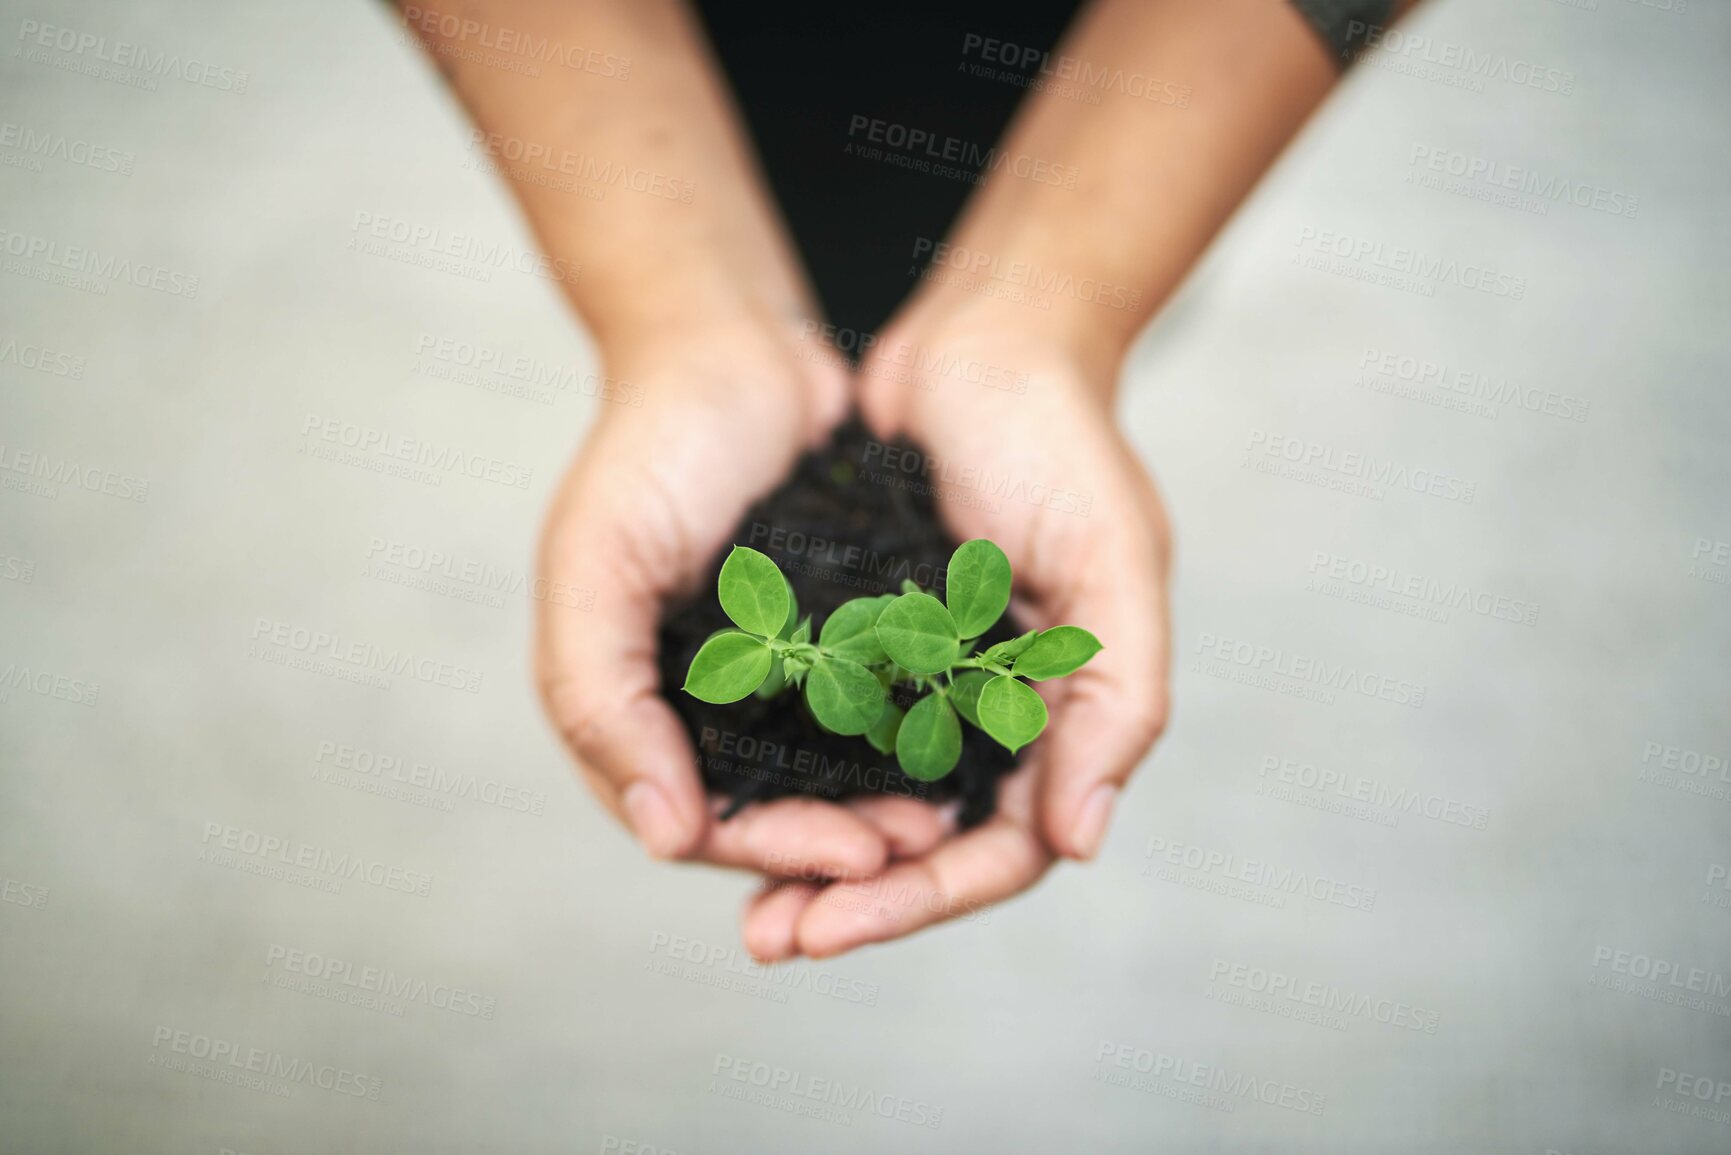 Buy stock photo Cropped shot of an unidentifiable businesswoman's hands holding a small seedling